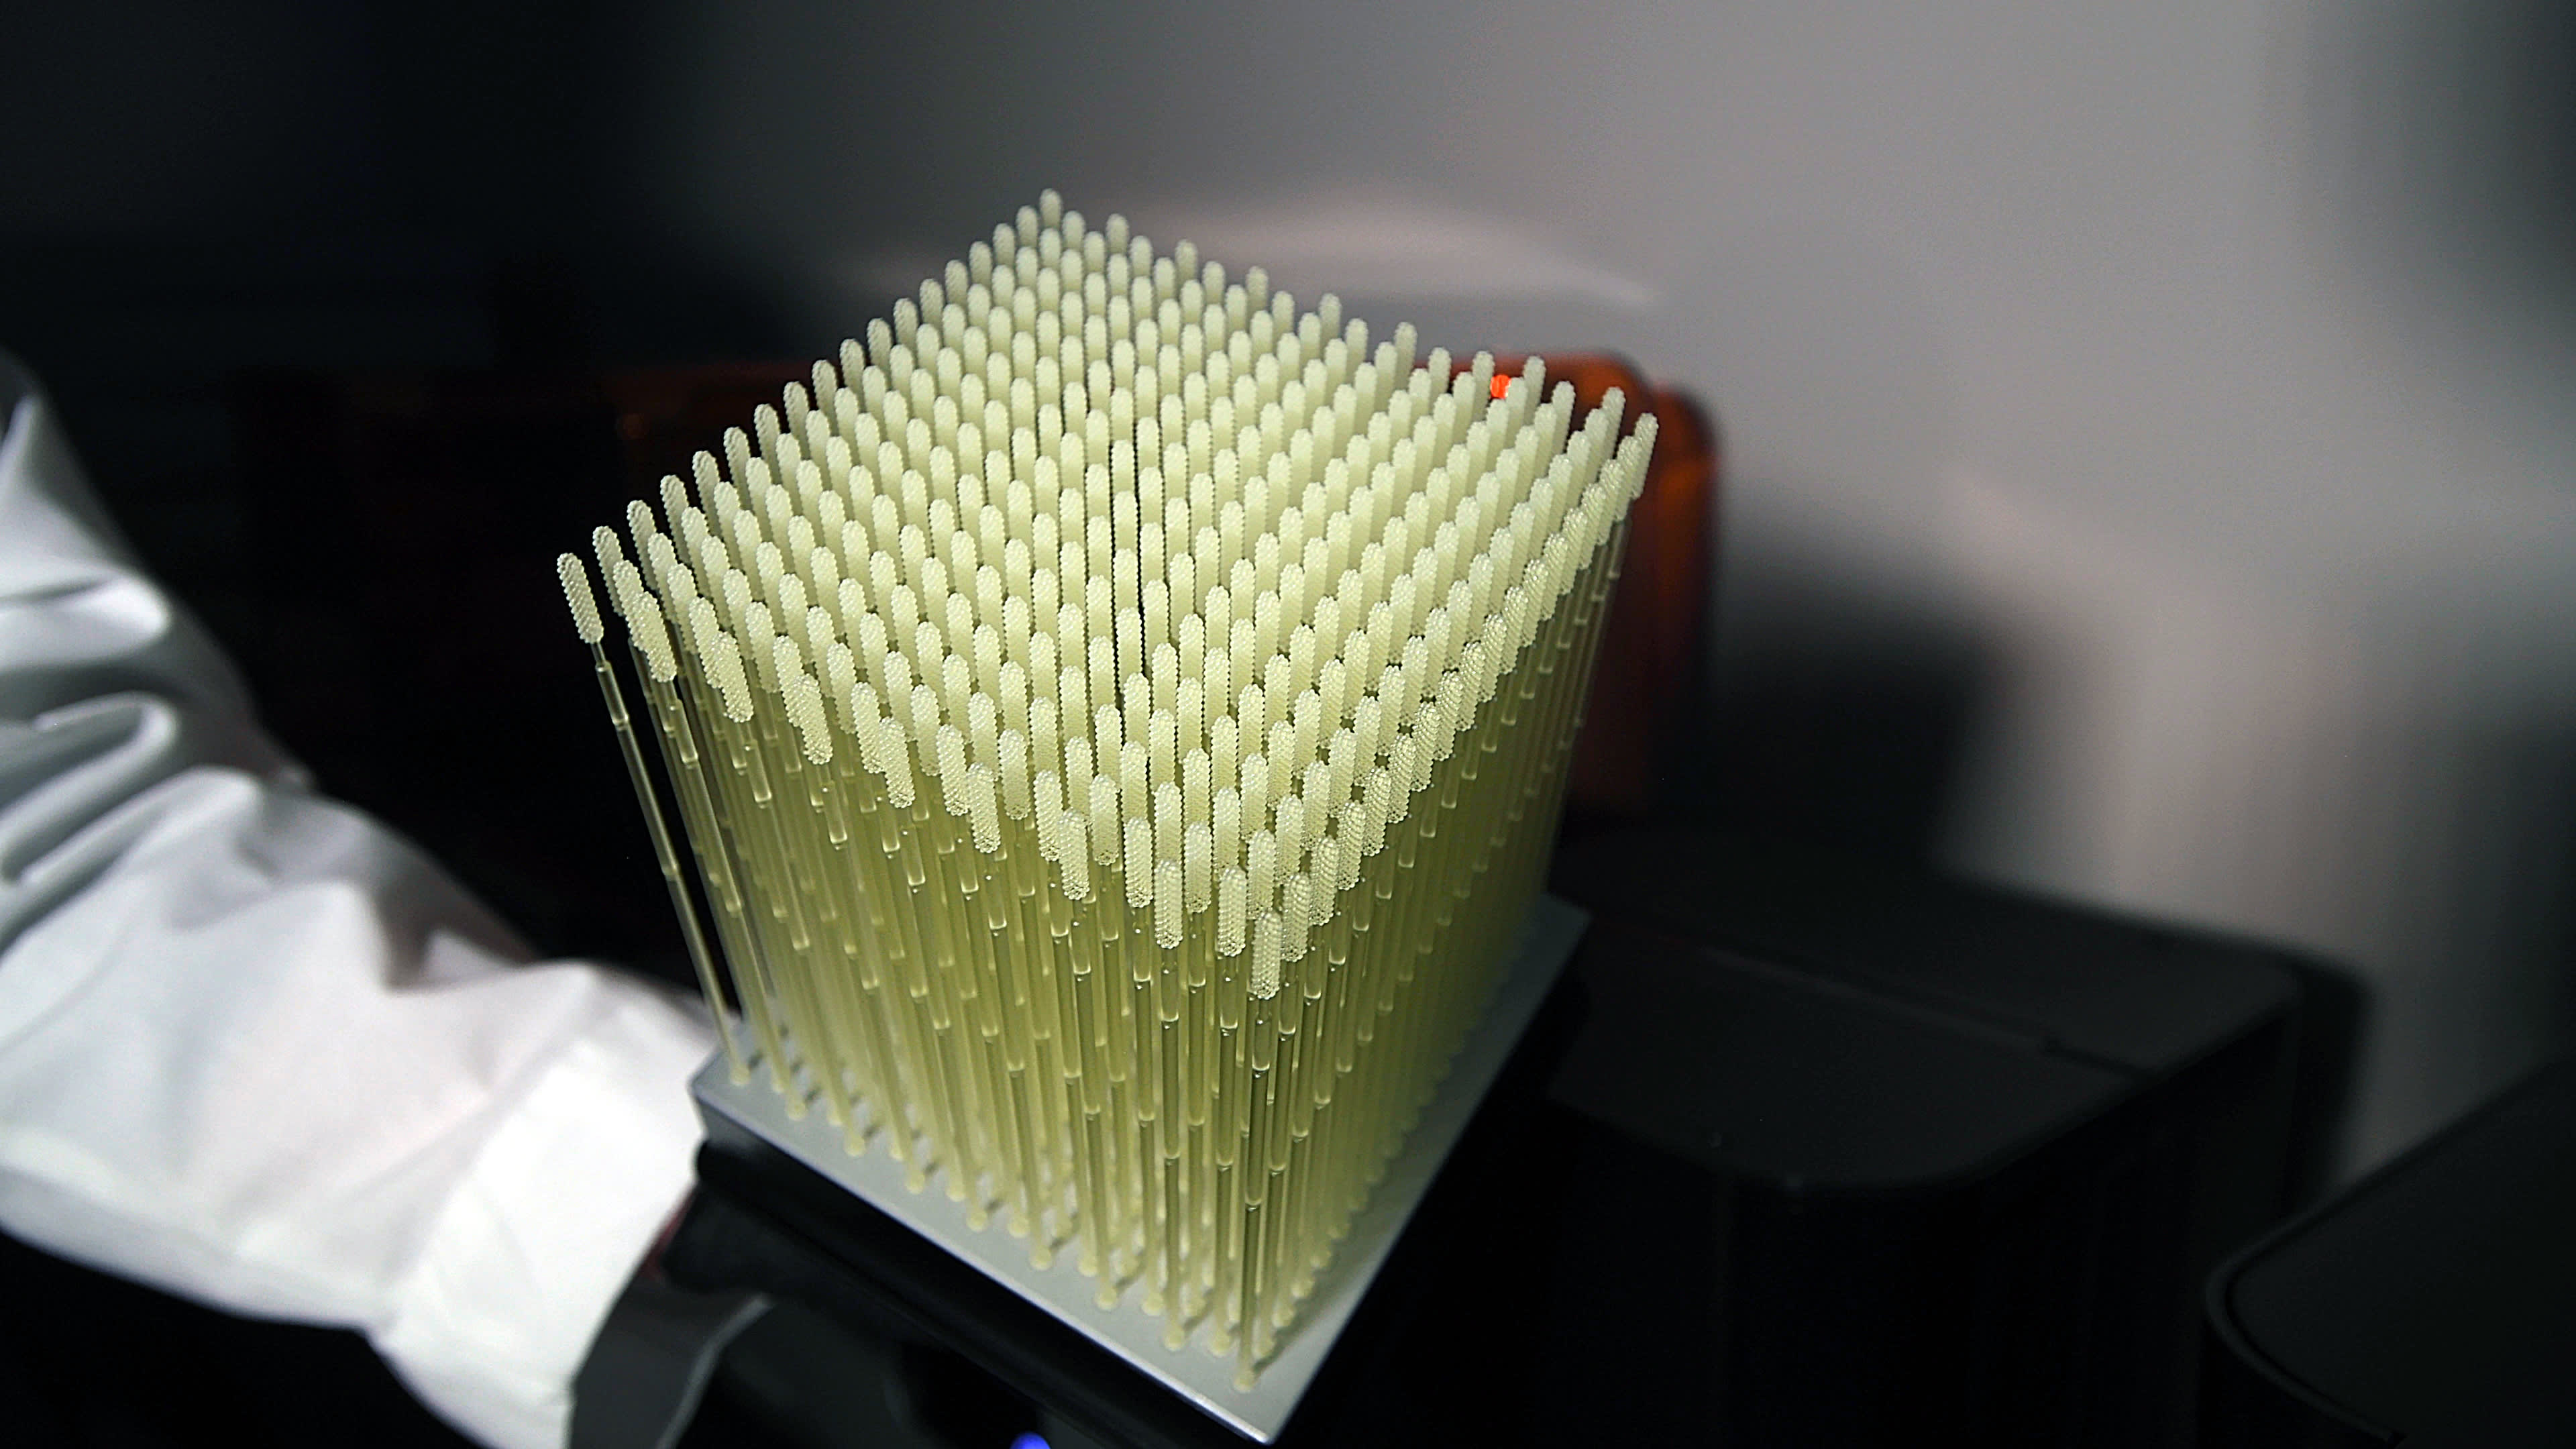 3D Printing Swabs can Aid America’s COVID-19 Testing Shortage